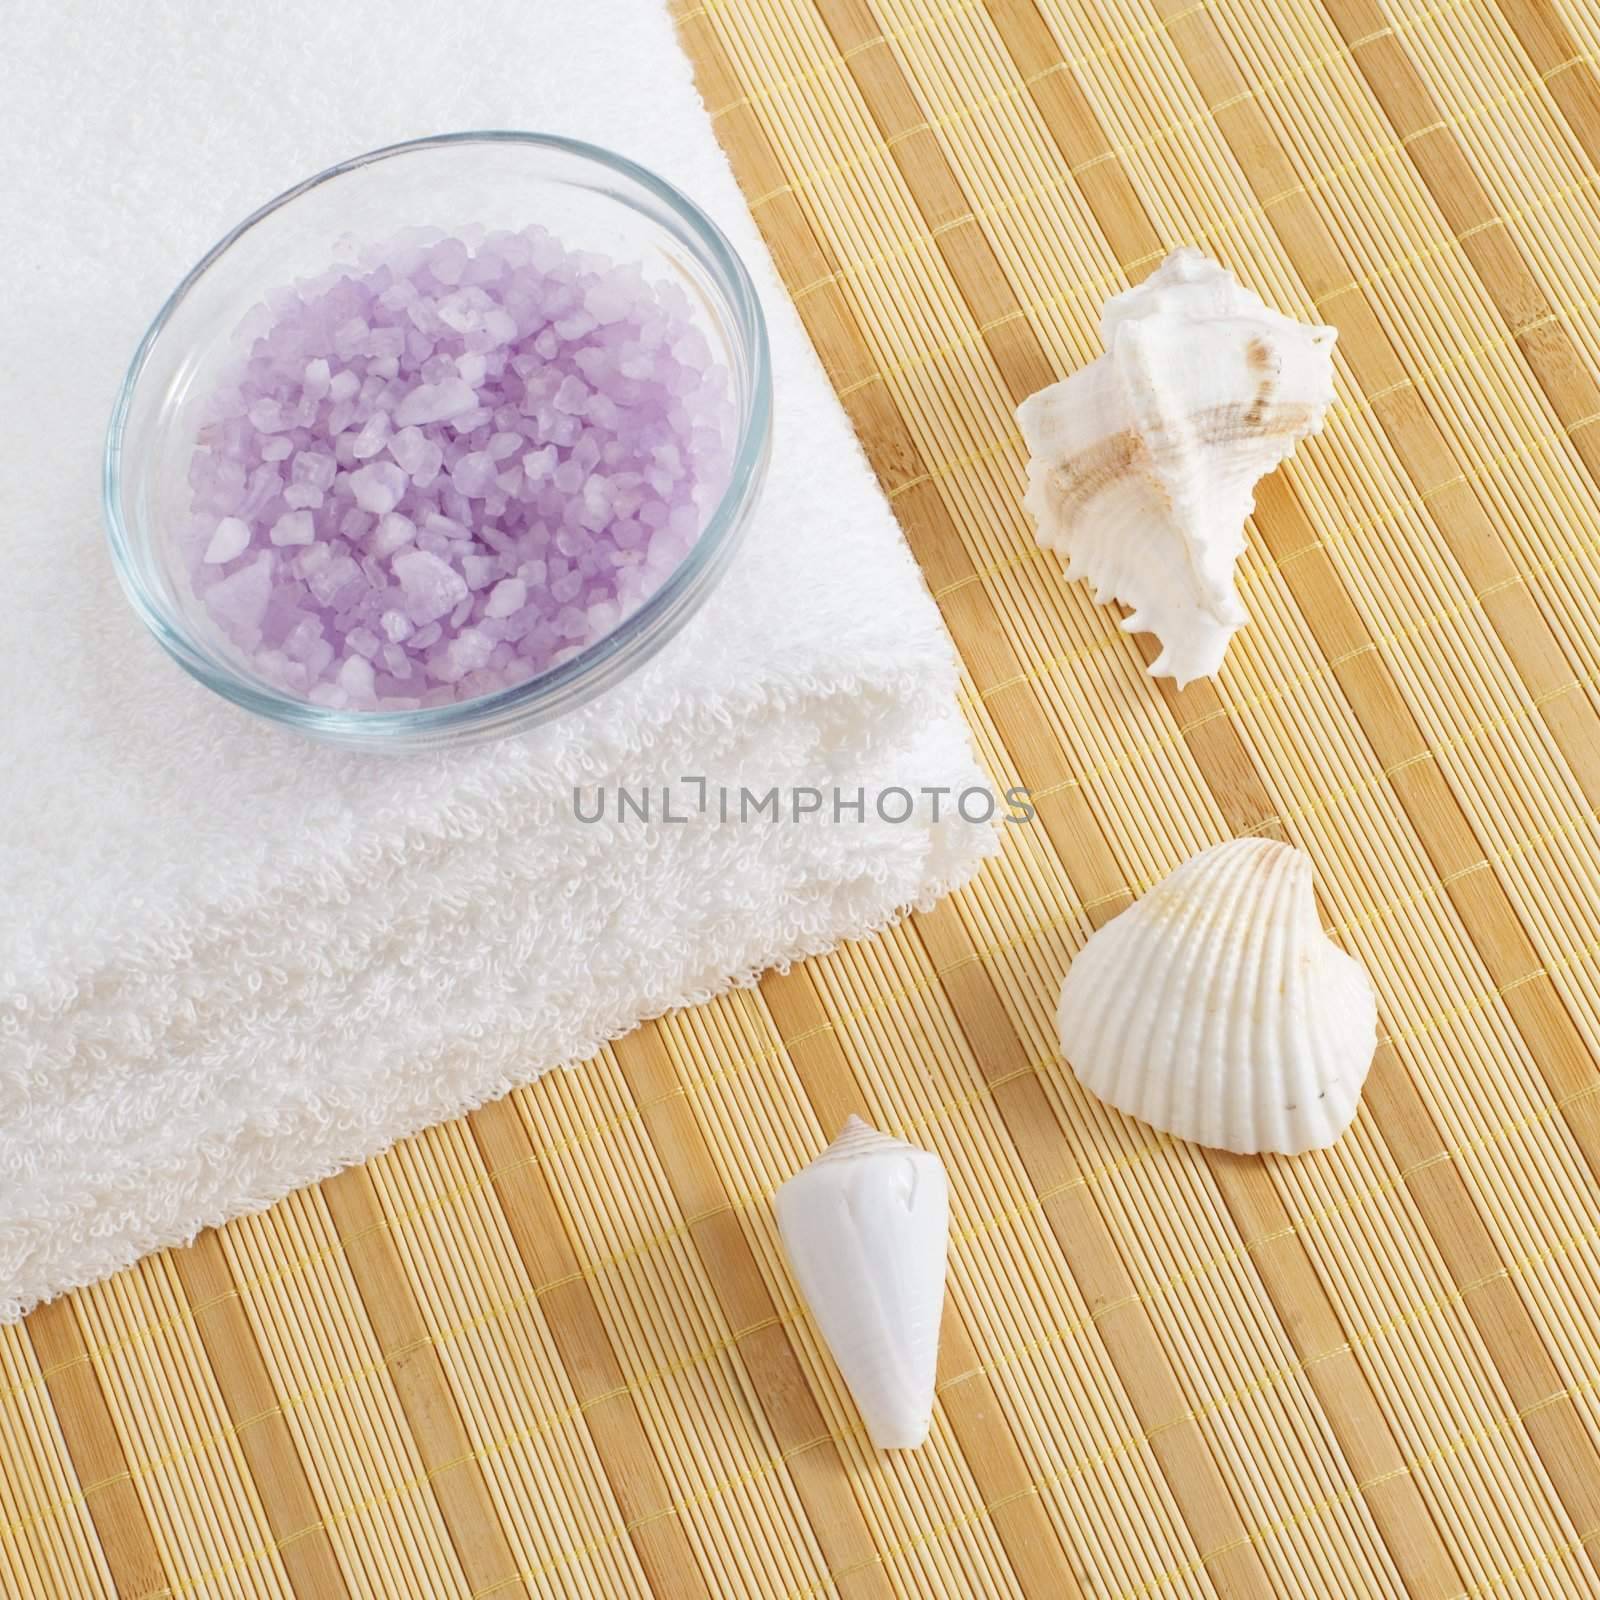 Bath products being displayed on a bamboo mat.